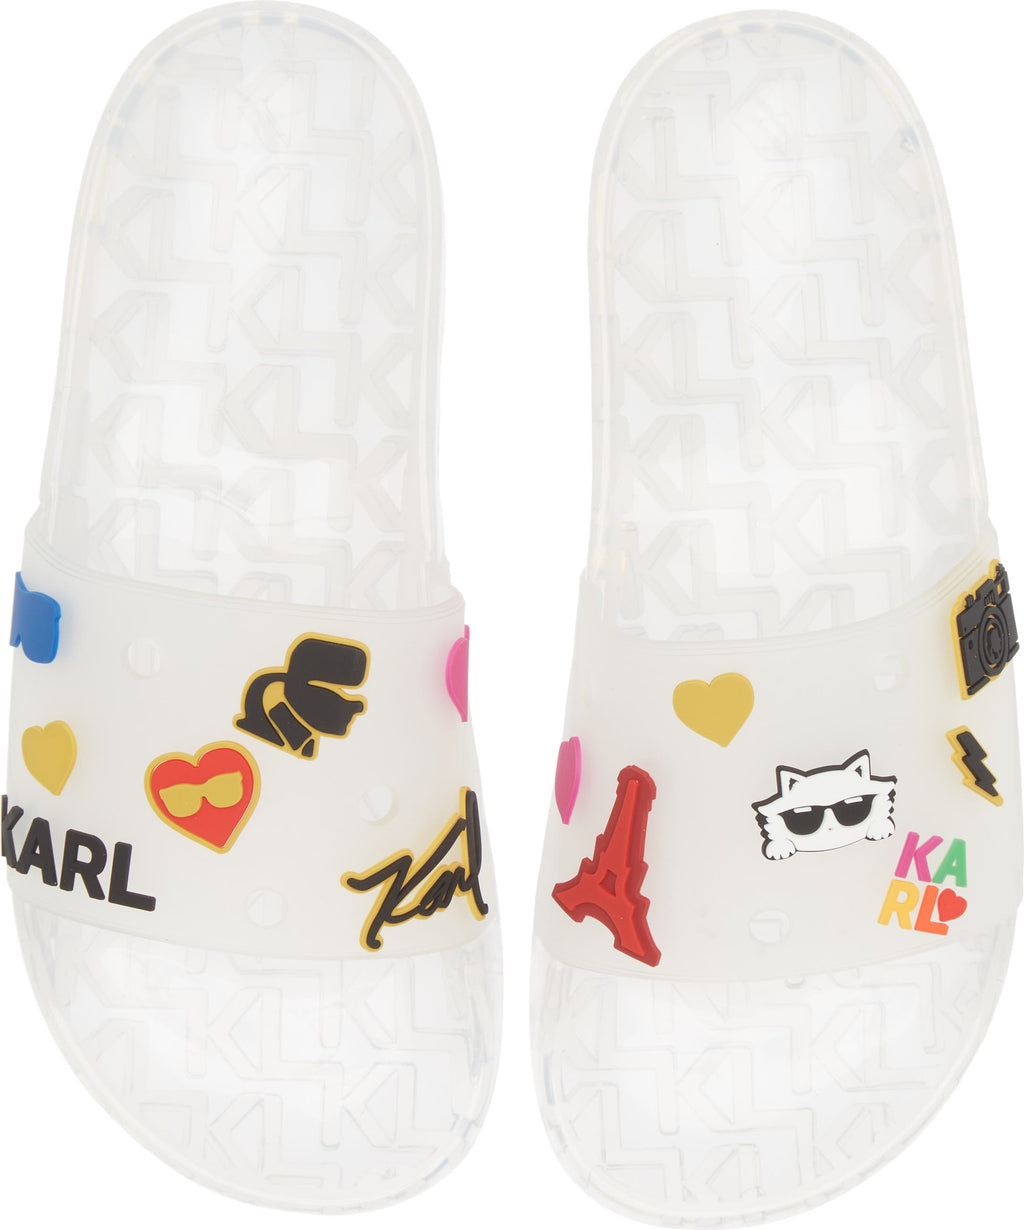 KARL LAGERFELD PARIS Thea Jelly Slide Sandal, Main, color, CLEAR